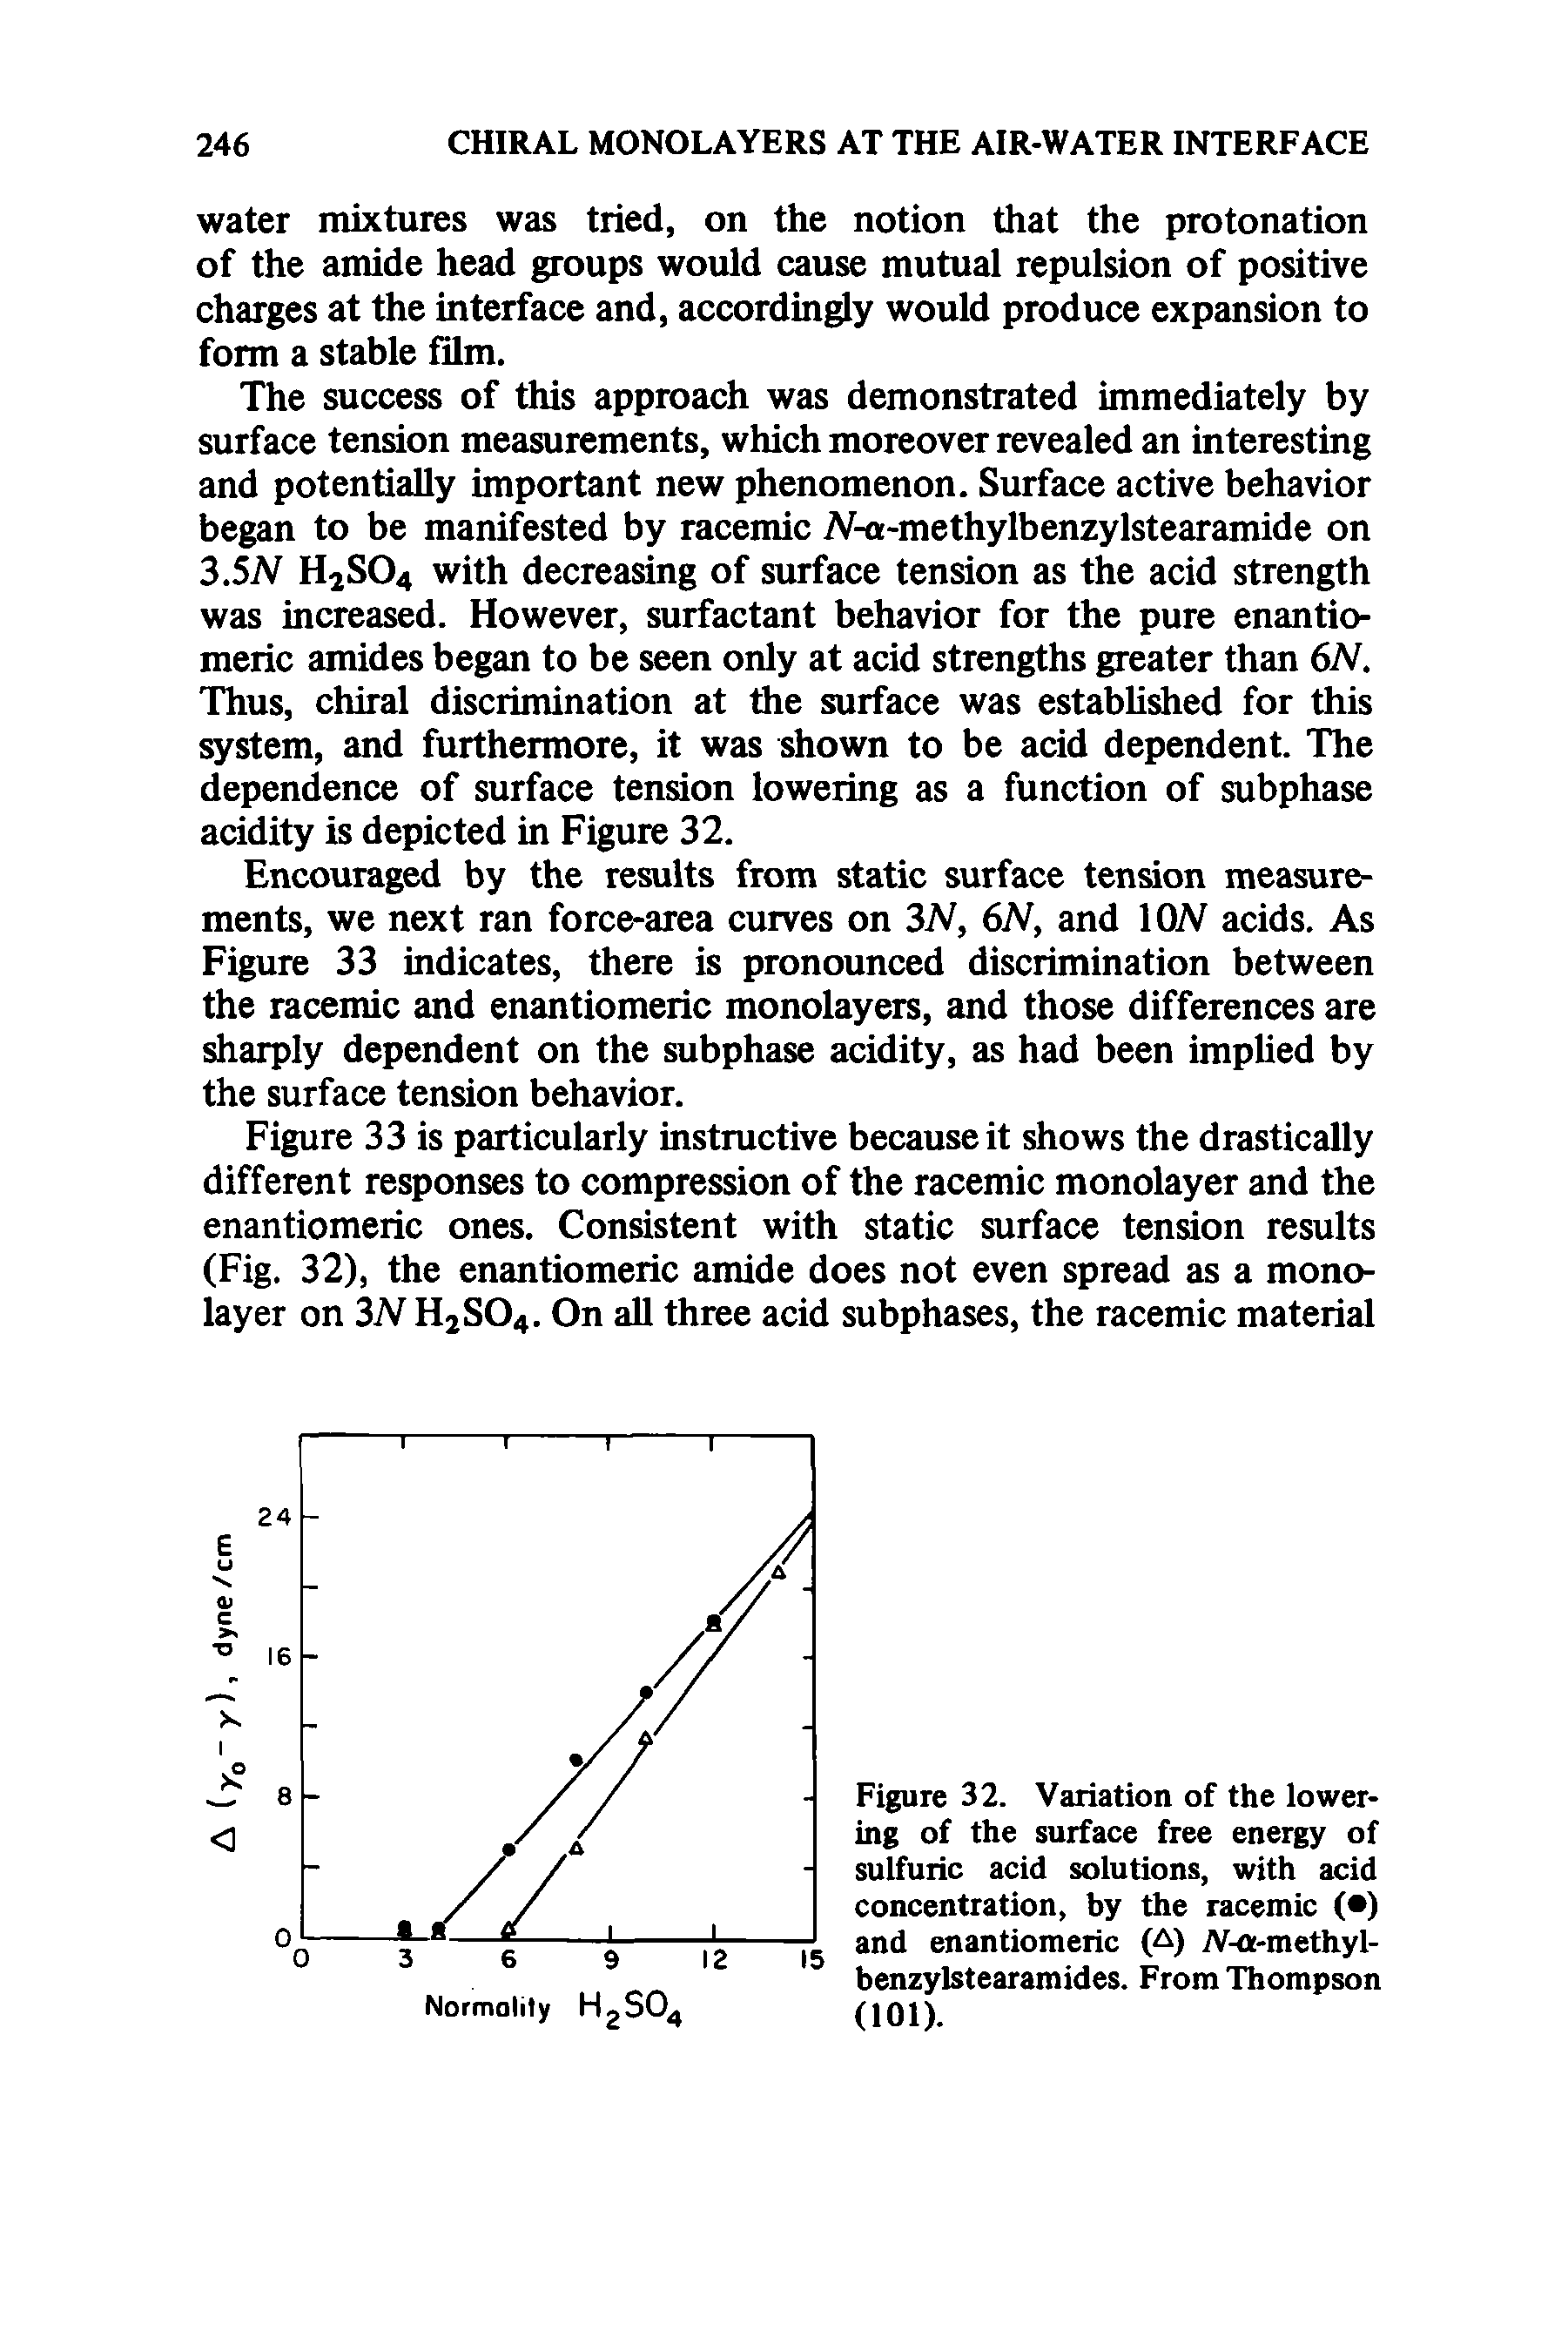 Figure 32. Variation of the lowering of the surface free energy of sulfuric acid solutions, with acid concentration, by the racemic ( ) and enantiomeric (A) -a-methyl-benzylstearamides. From Thompson (101).